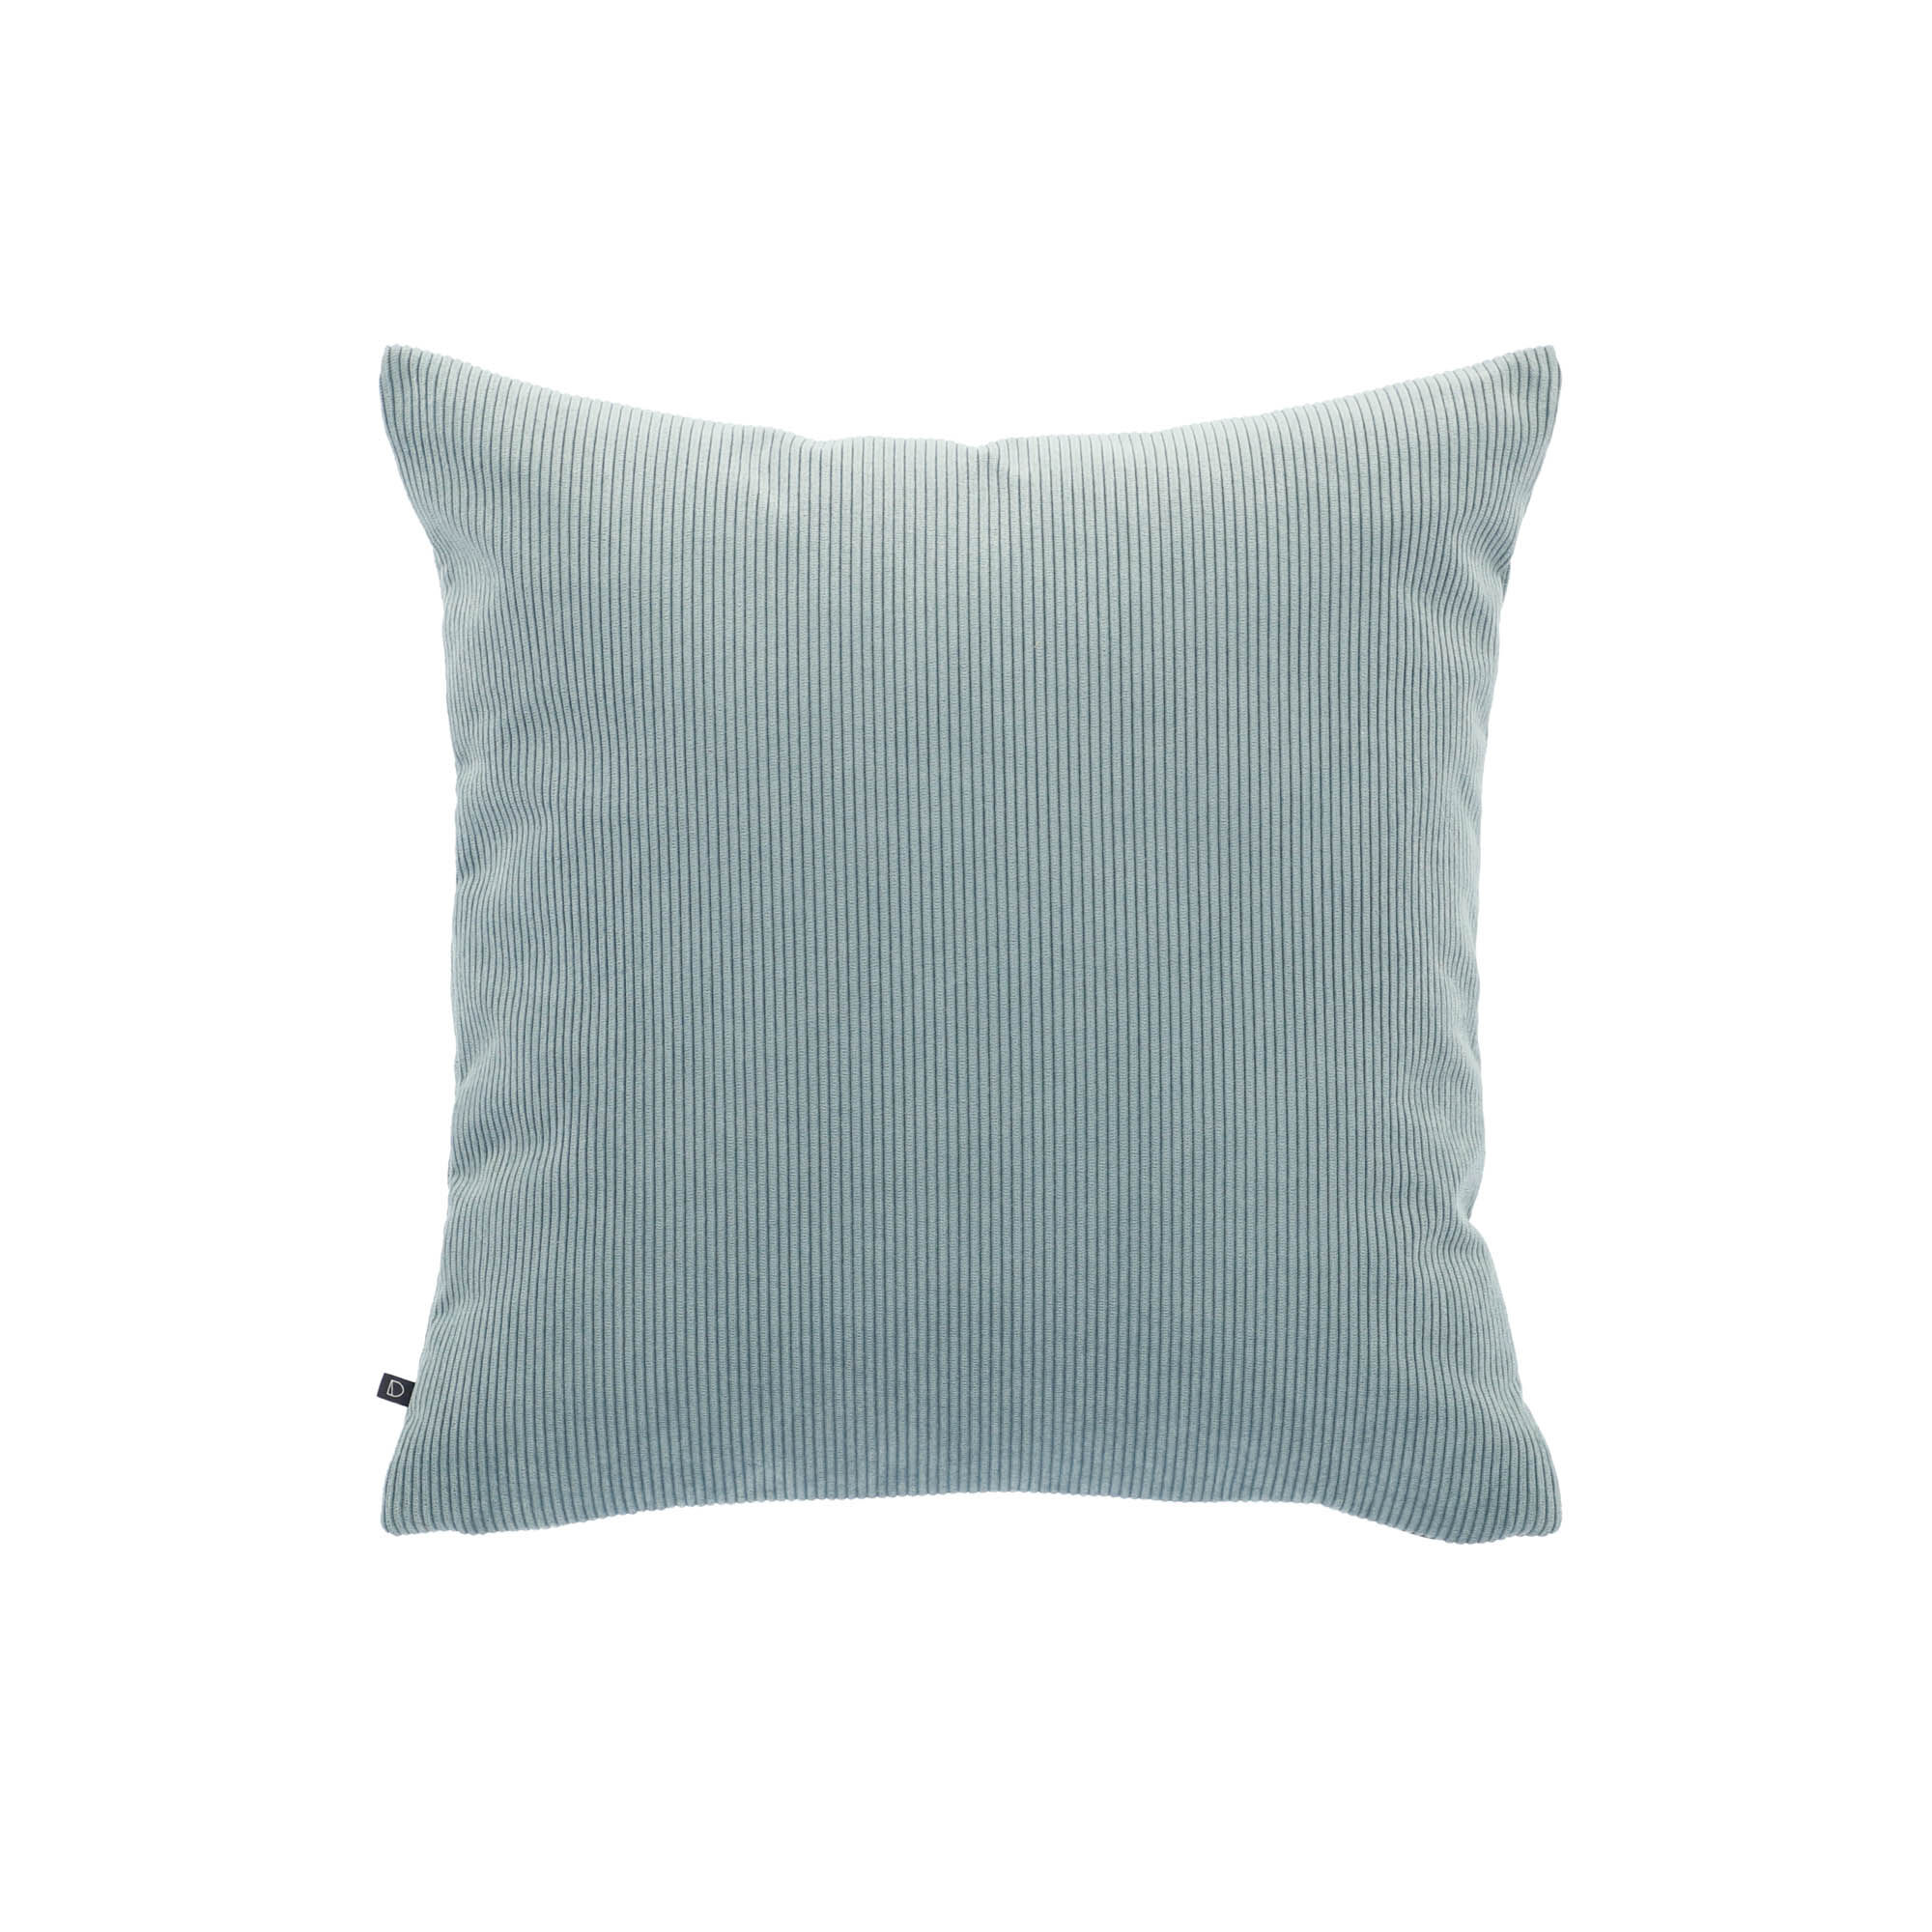 Kave Home Turquoise corduroy Namie cushion cover 45 x 45 cm